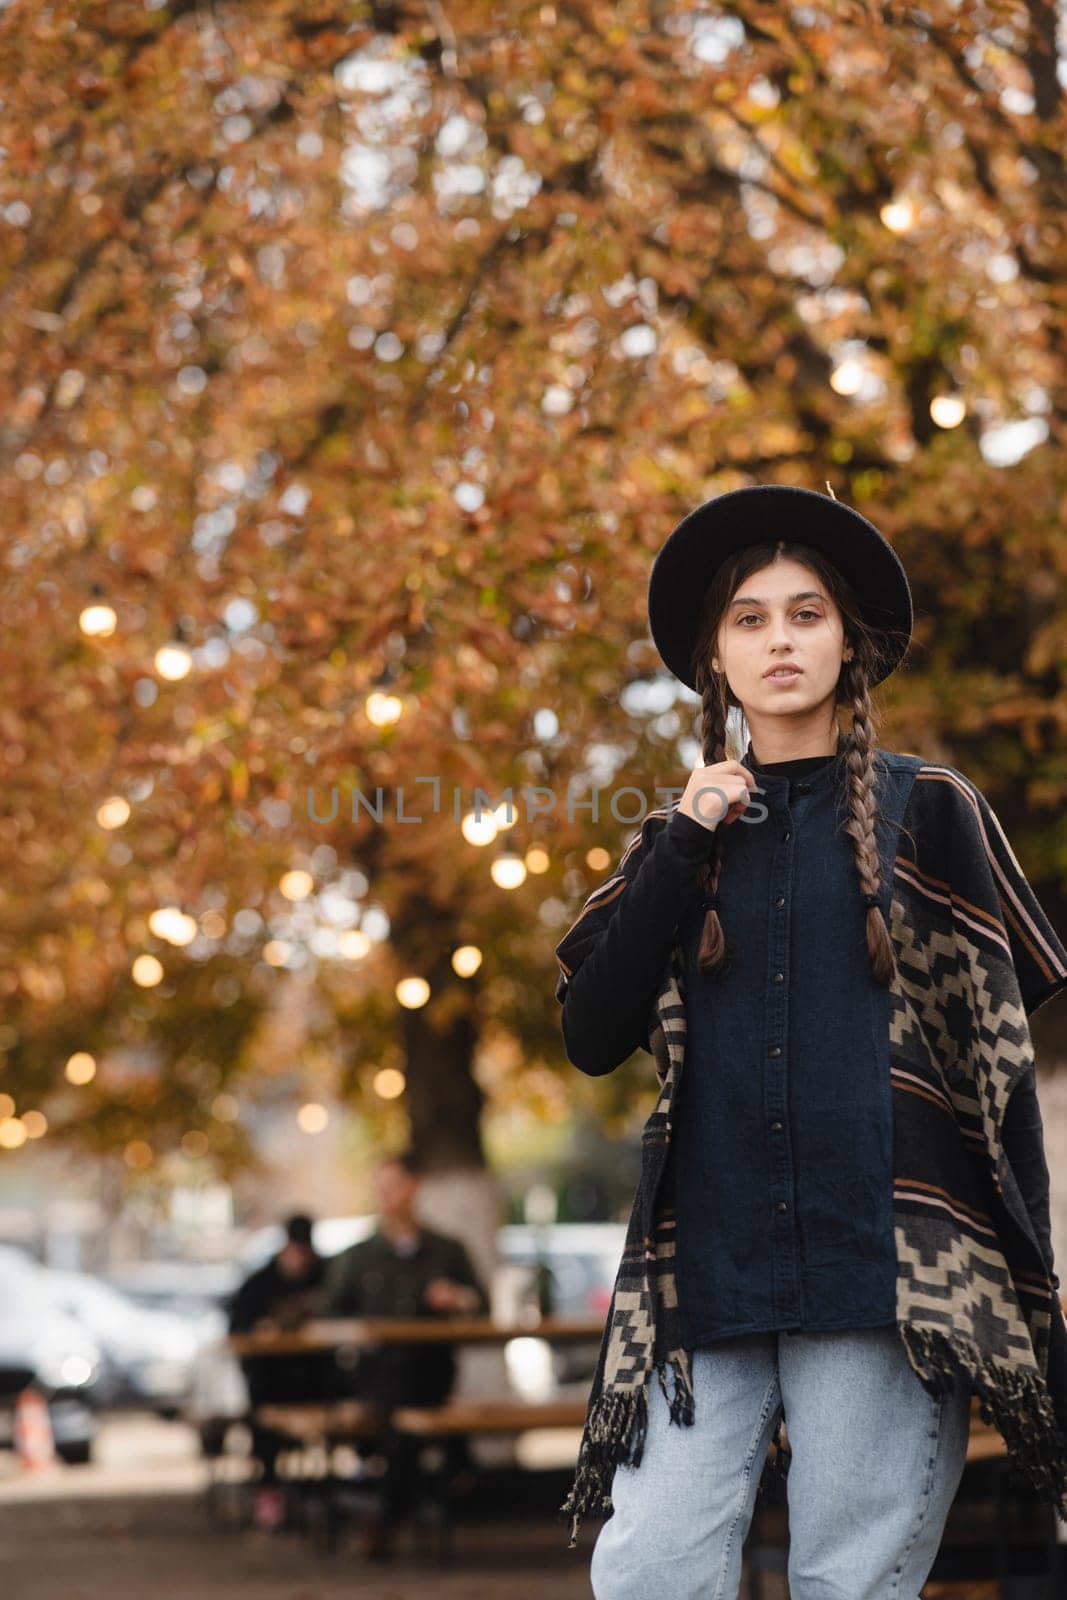 A fashionable girl showcases boho elegance, topped with a black hat, amidst the autumn city streets. by teksomolika